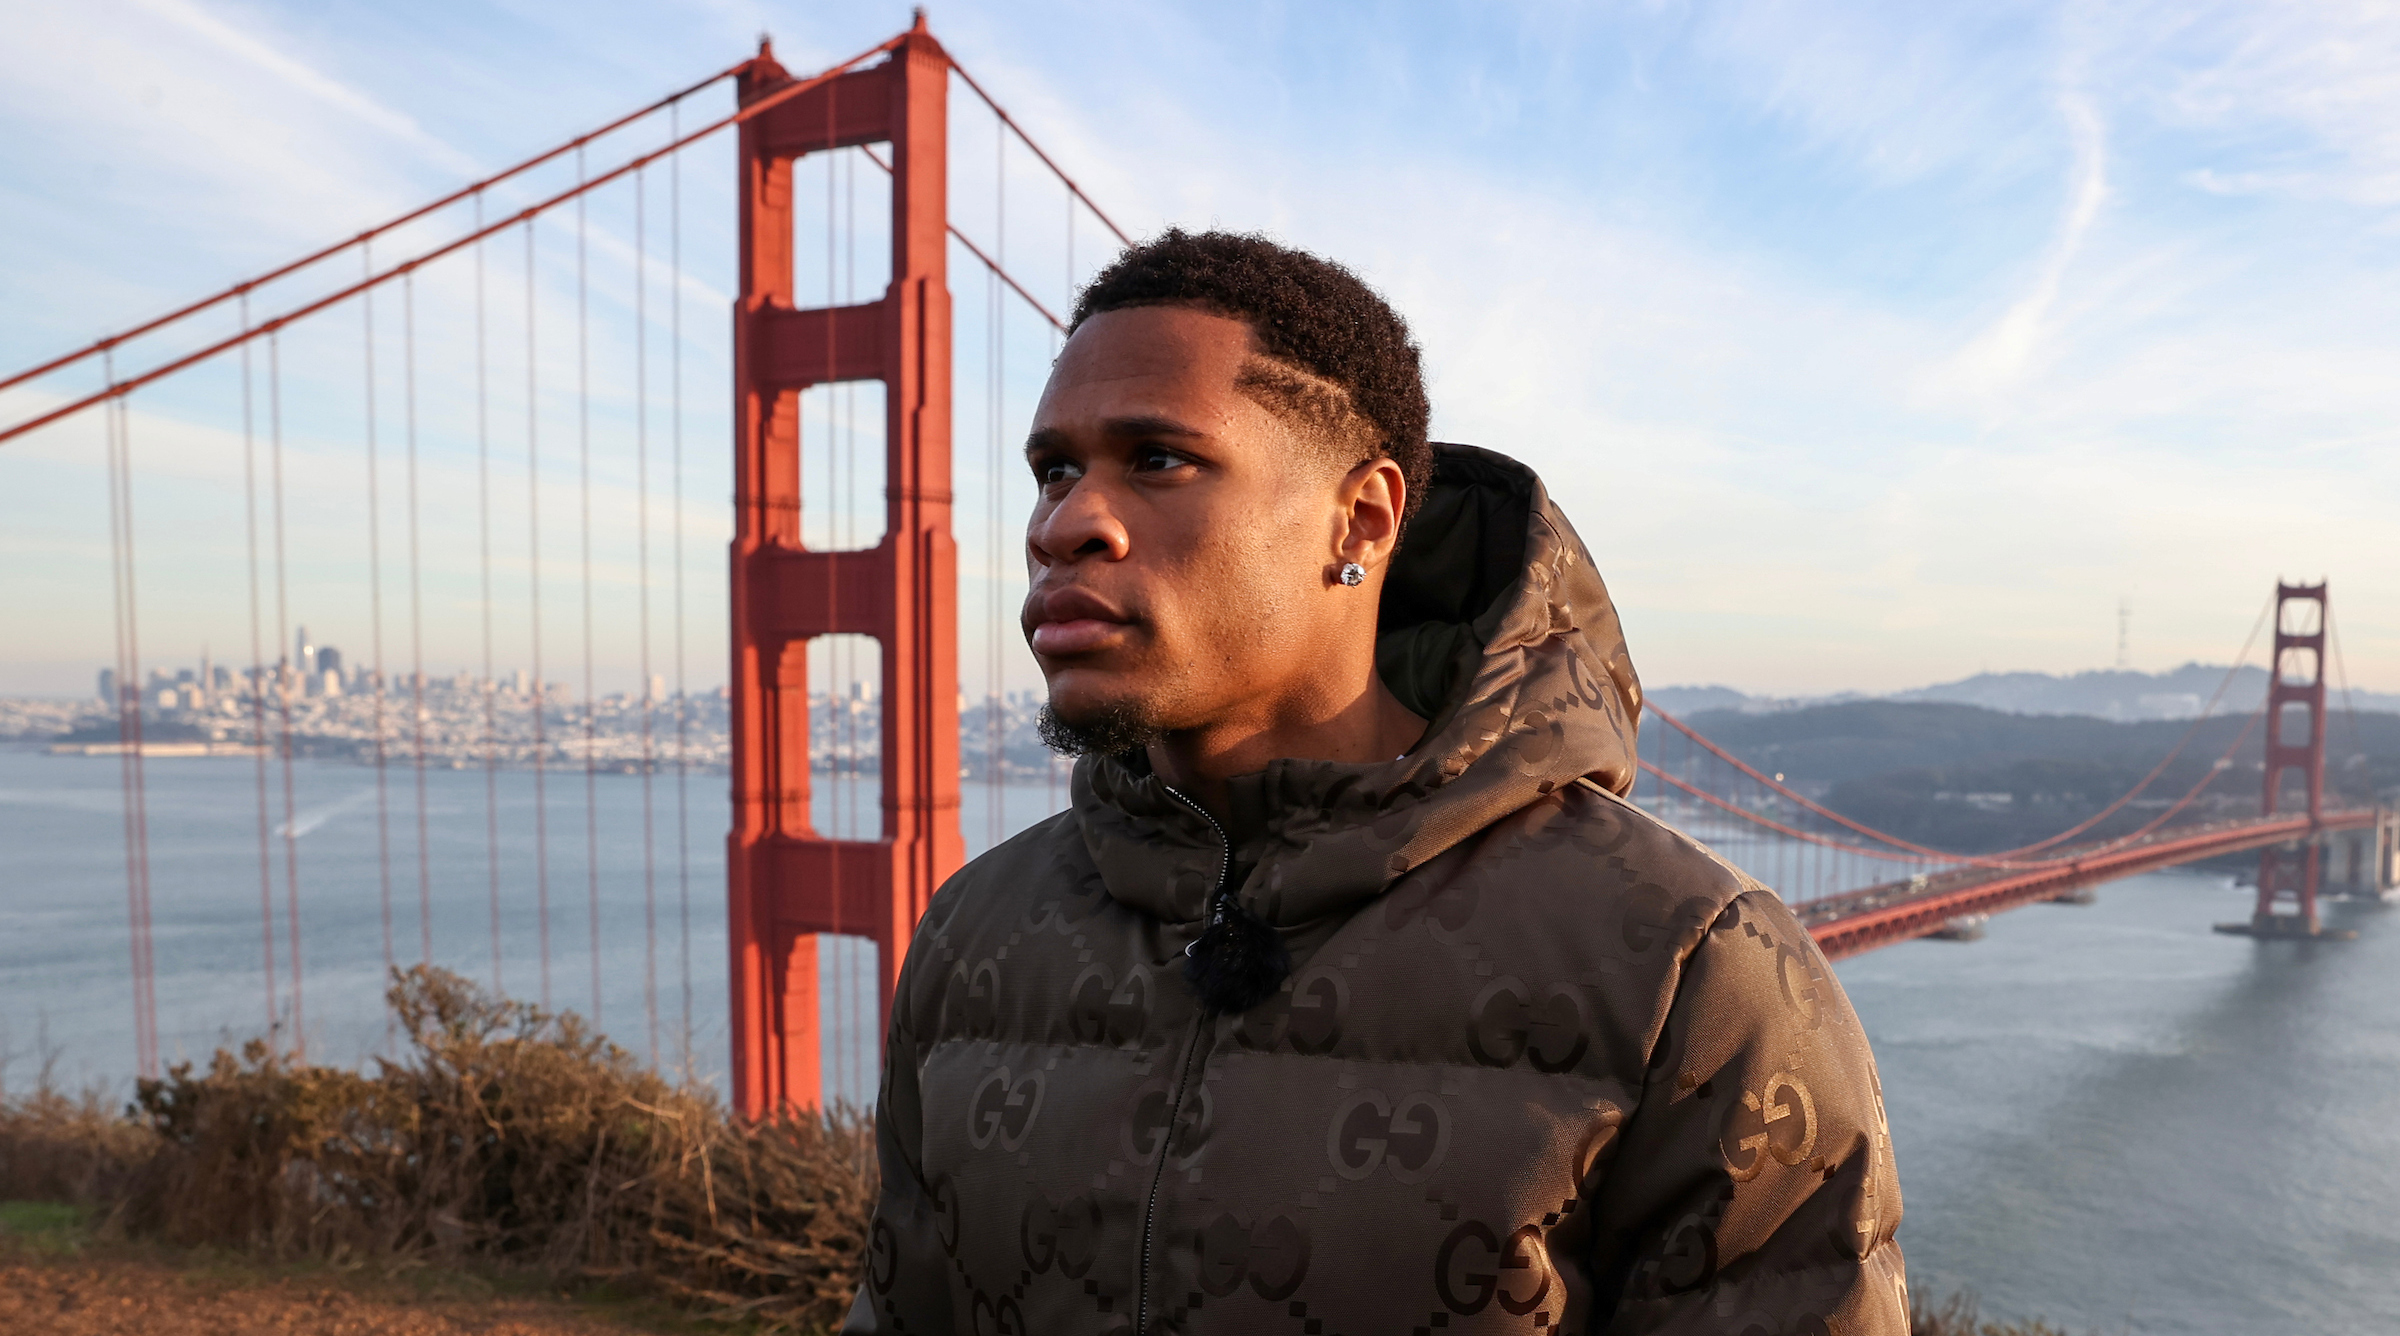 Devin Haney looks on after facing off with Regis Prograis at the Golden Gate Bridge Park ahead of their bout.